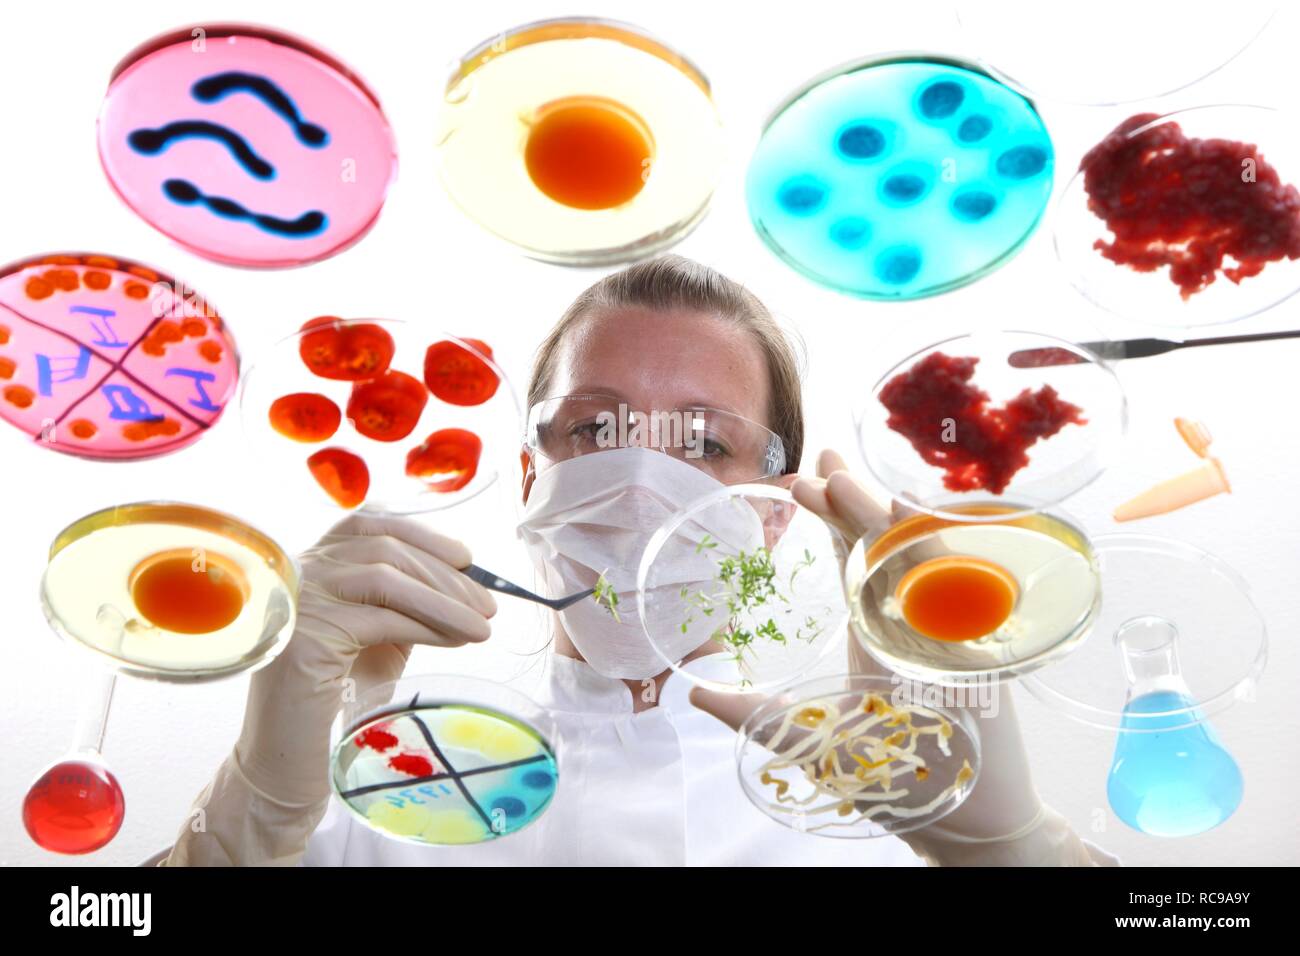 Food testing, laboratory technician examining various foods such as meat, sprouts, chicken eggs, preparing them for tests for Stock Photo